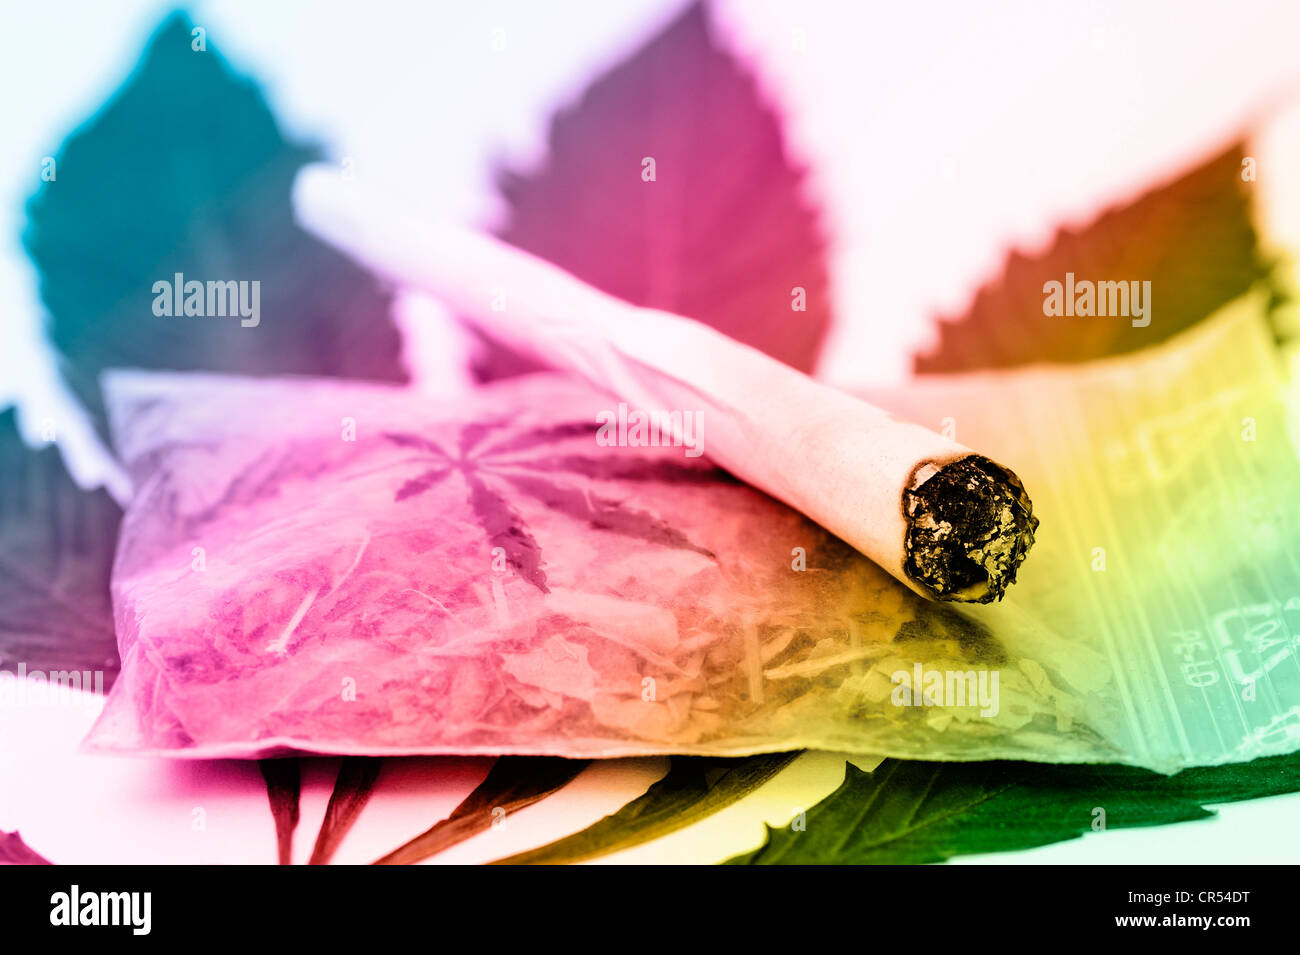 Joint on a cannabis leaf Stock Photo